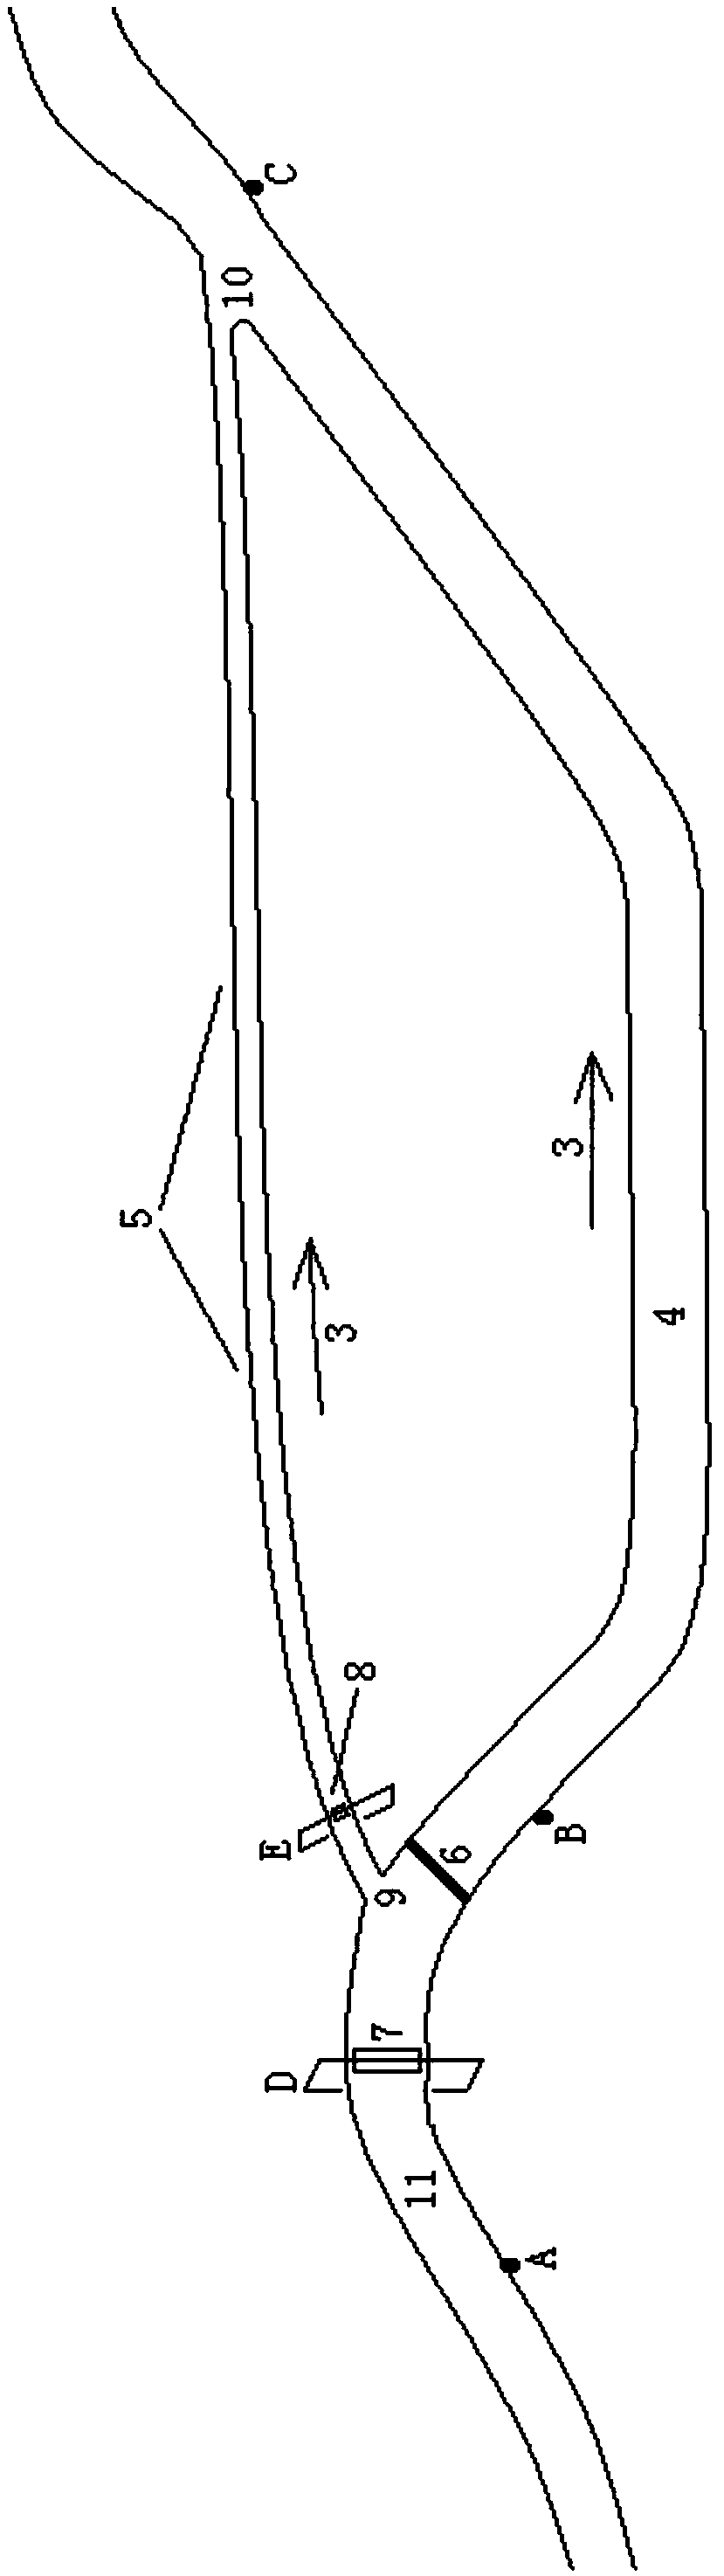 Method for treating plain river course